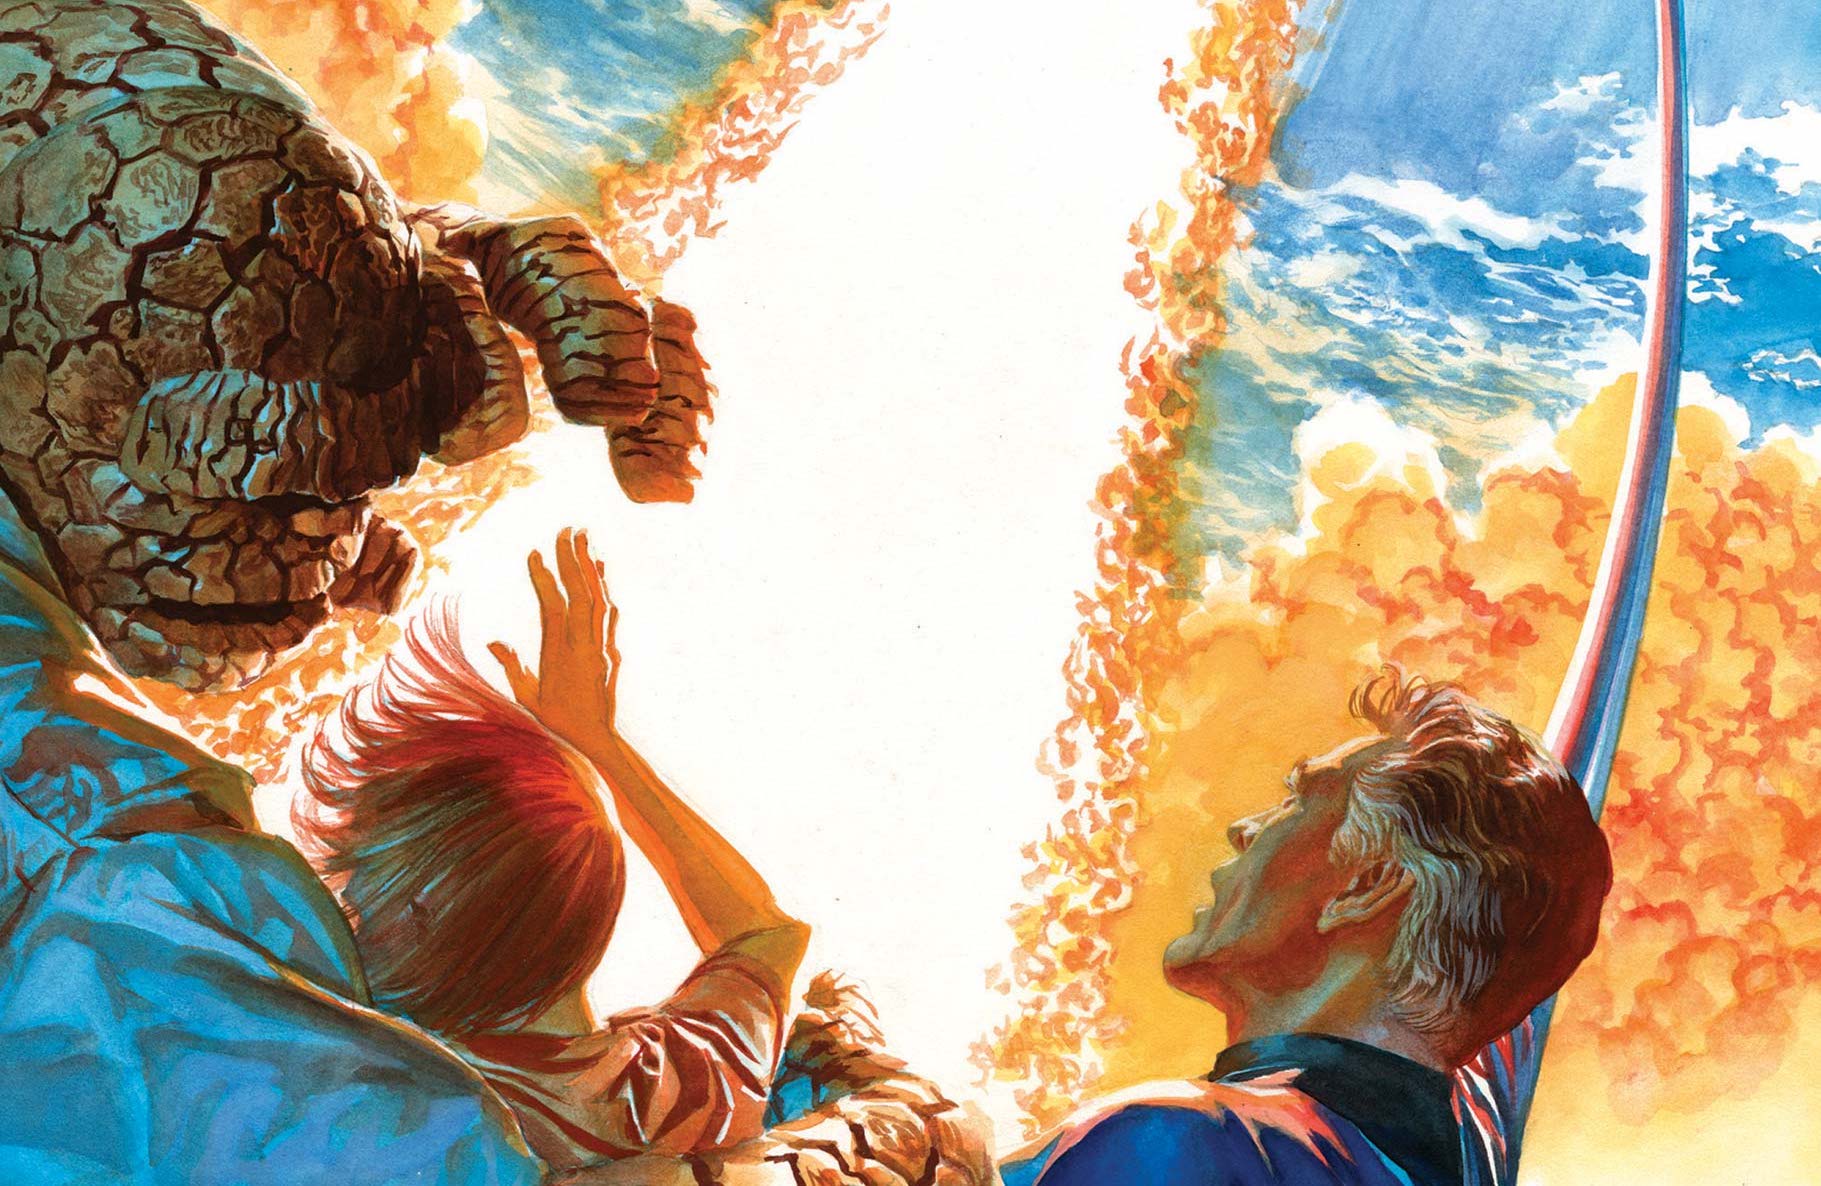 'Fantastic Four' #6 has the first family fight Dark Dimension bacteria